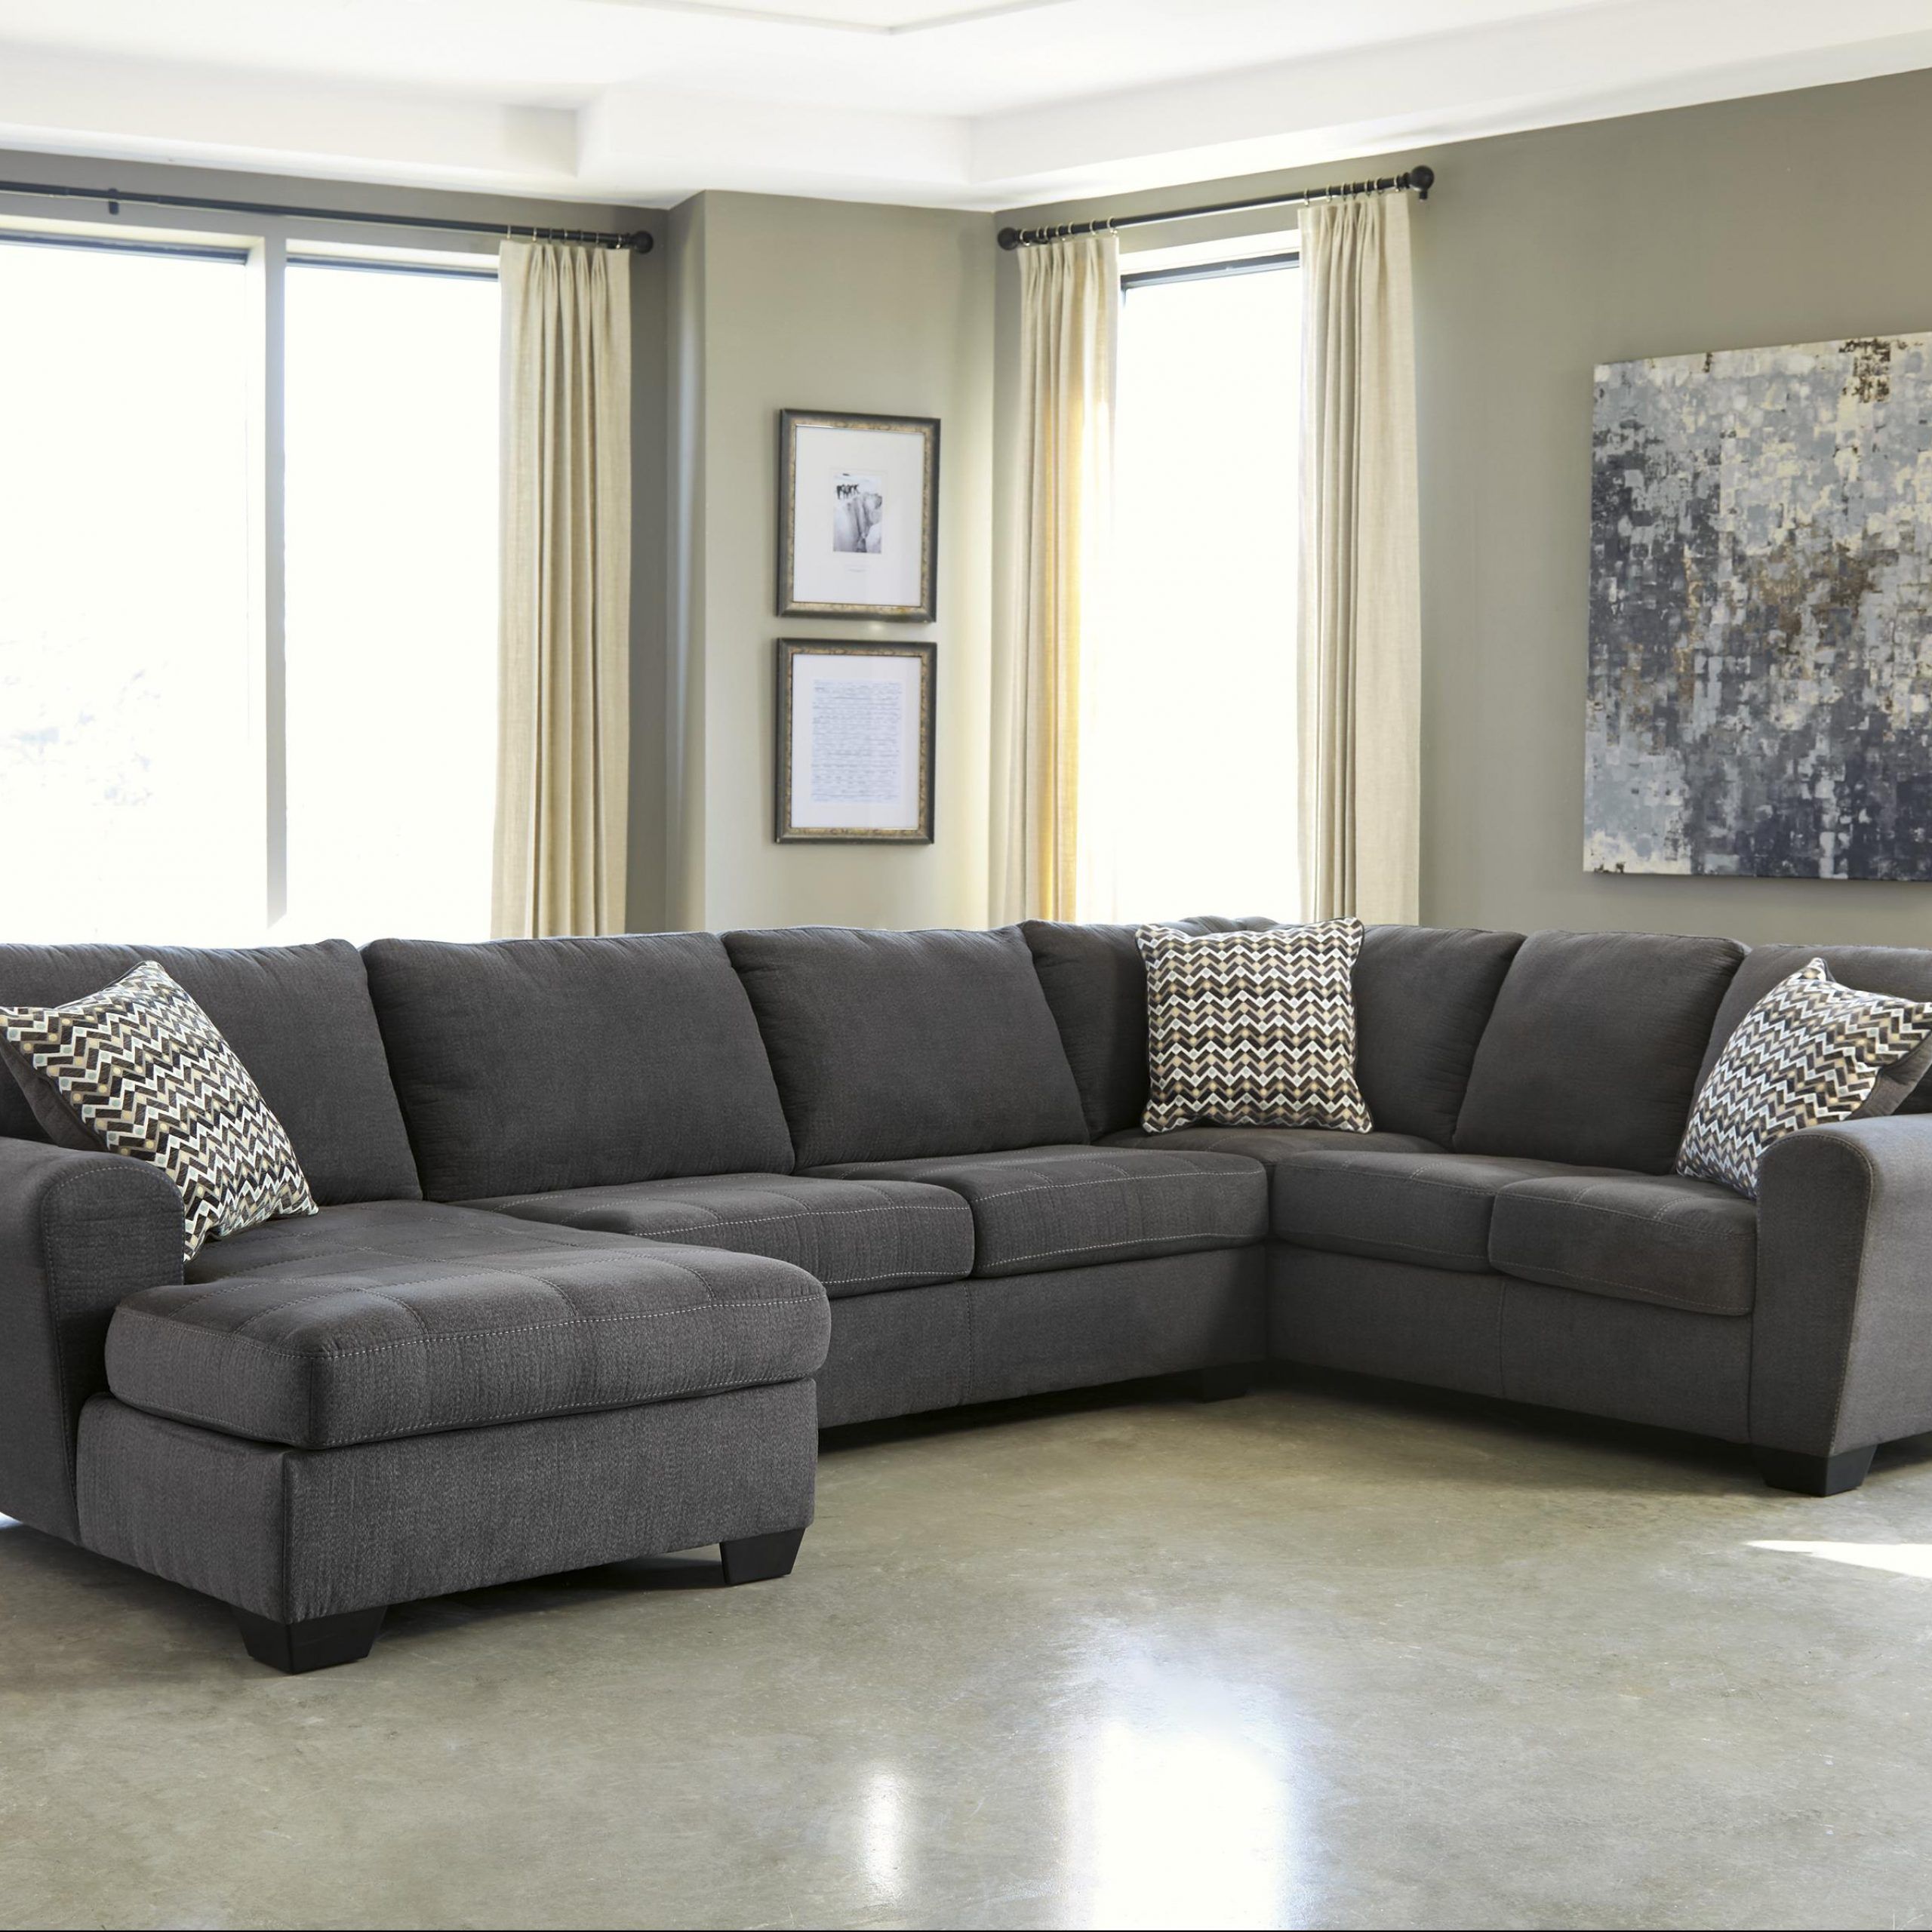 Contemporary 3 Piece Sectional With Left Chaise Regarding 4pc Crowningshield Contemporary Chaise Sectional Sofas (View 12 of 15)